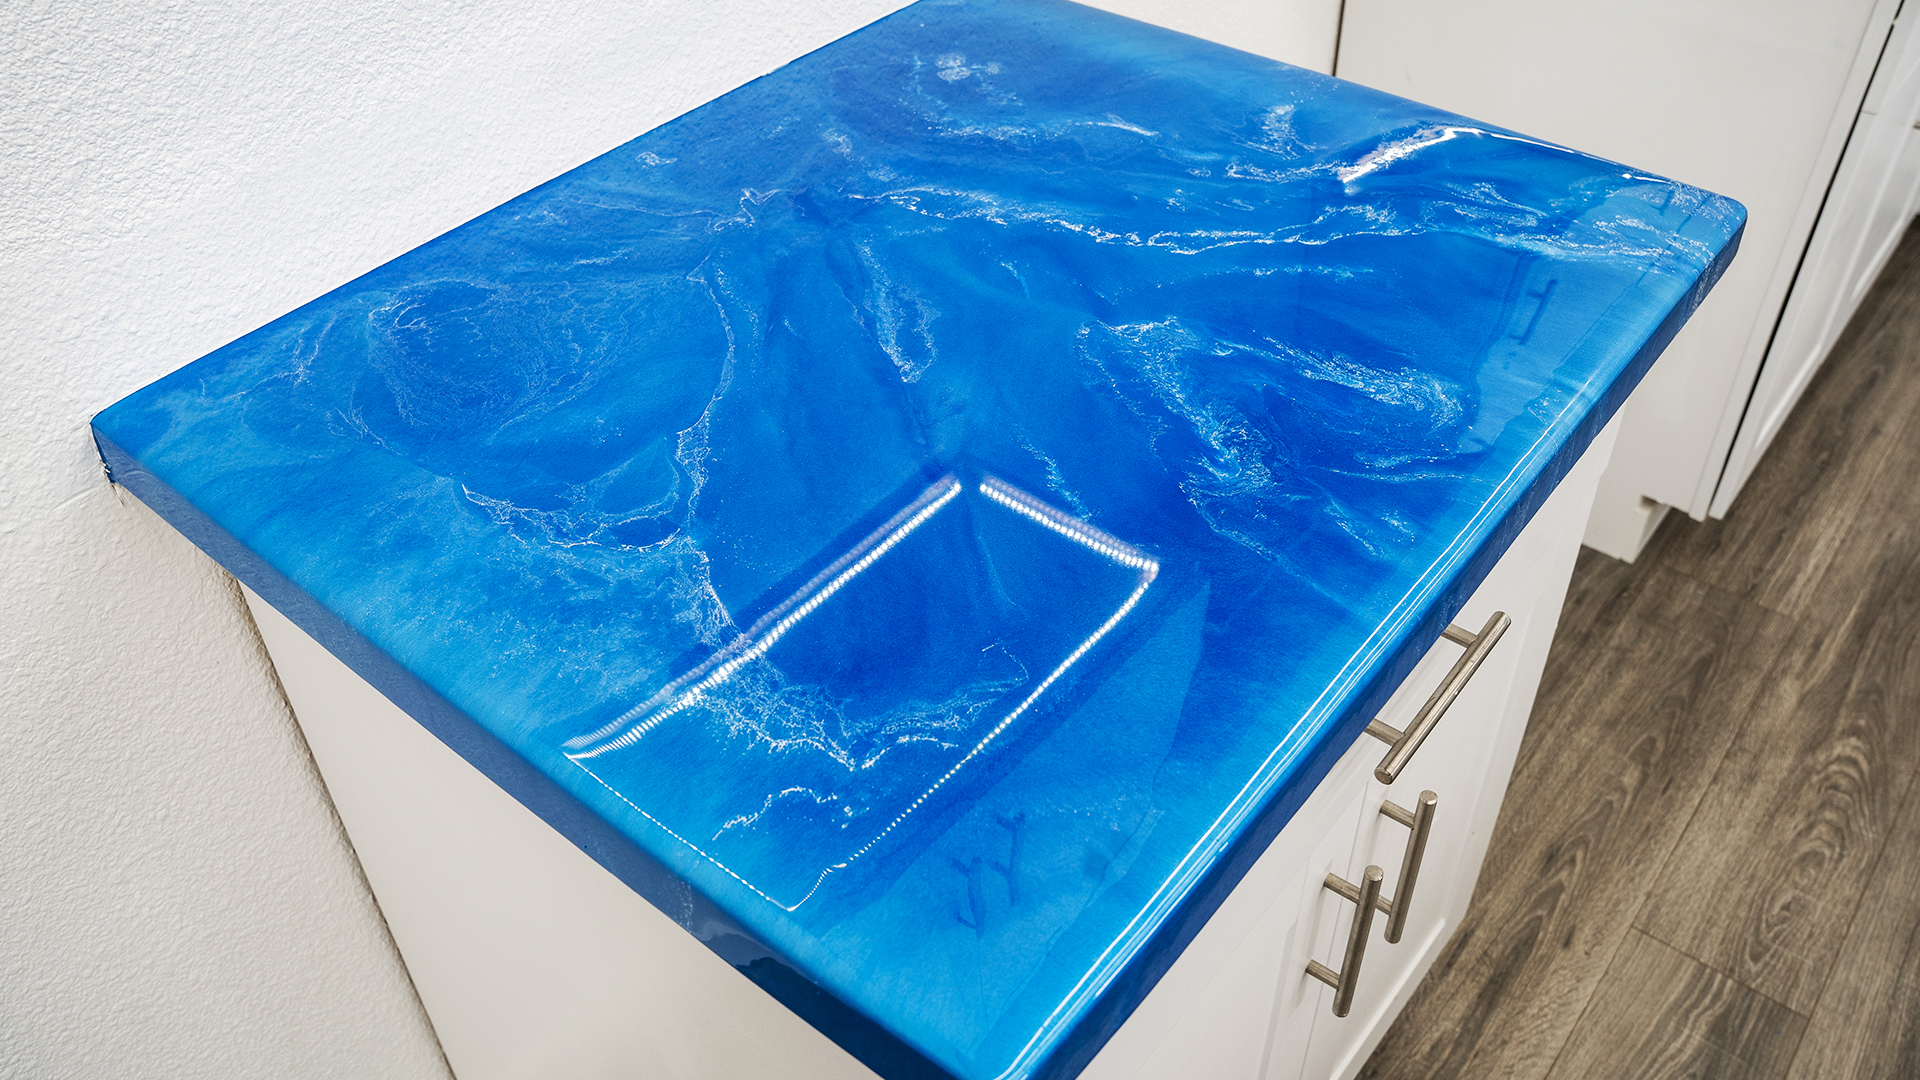 Which epoxy color kit is right for your kitchen style? - Counter